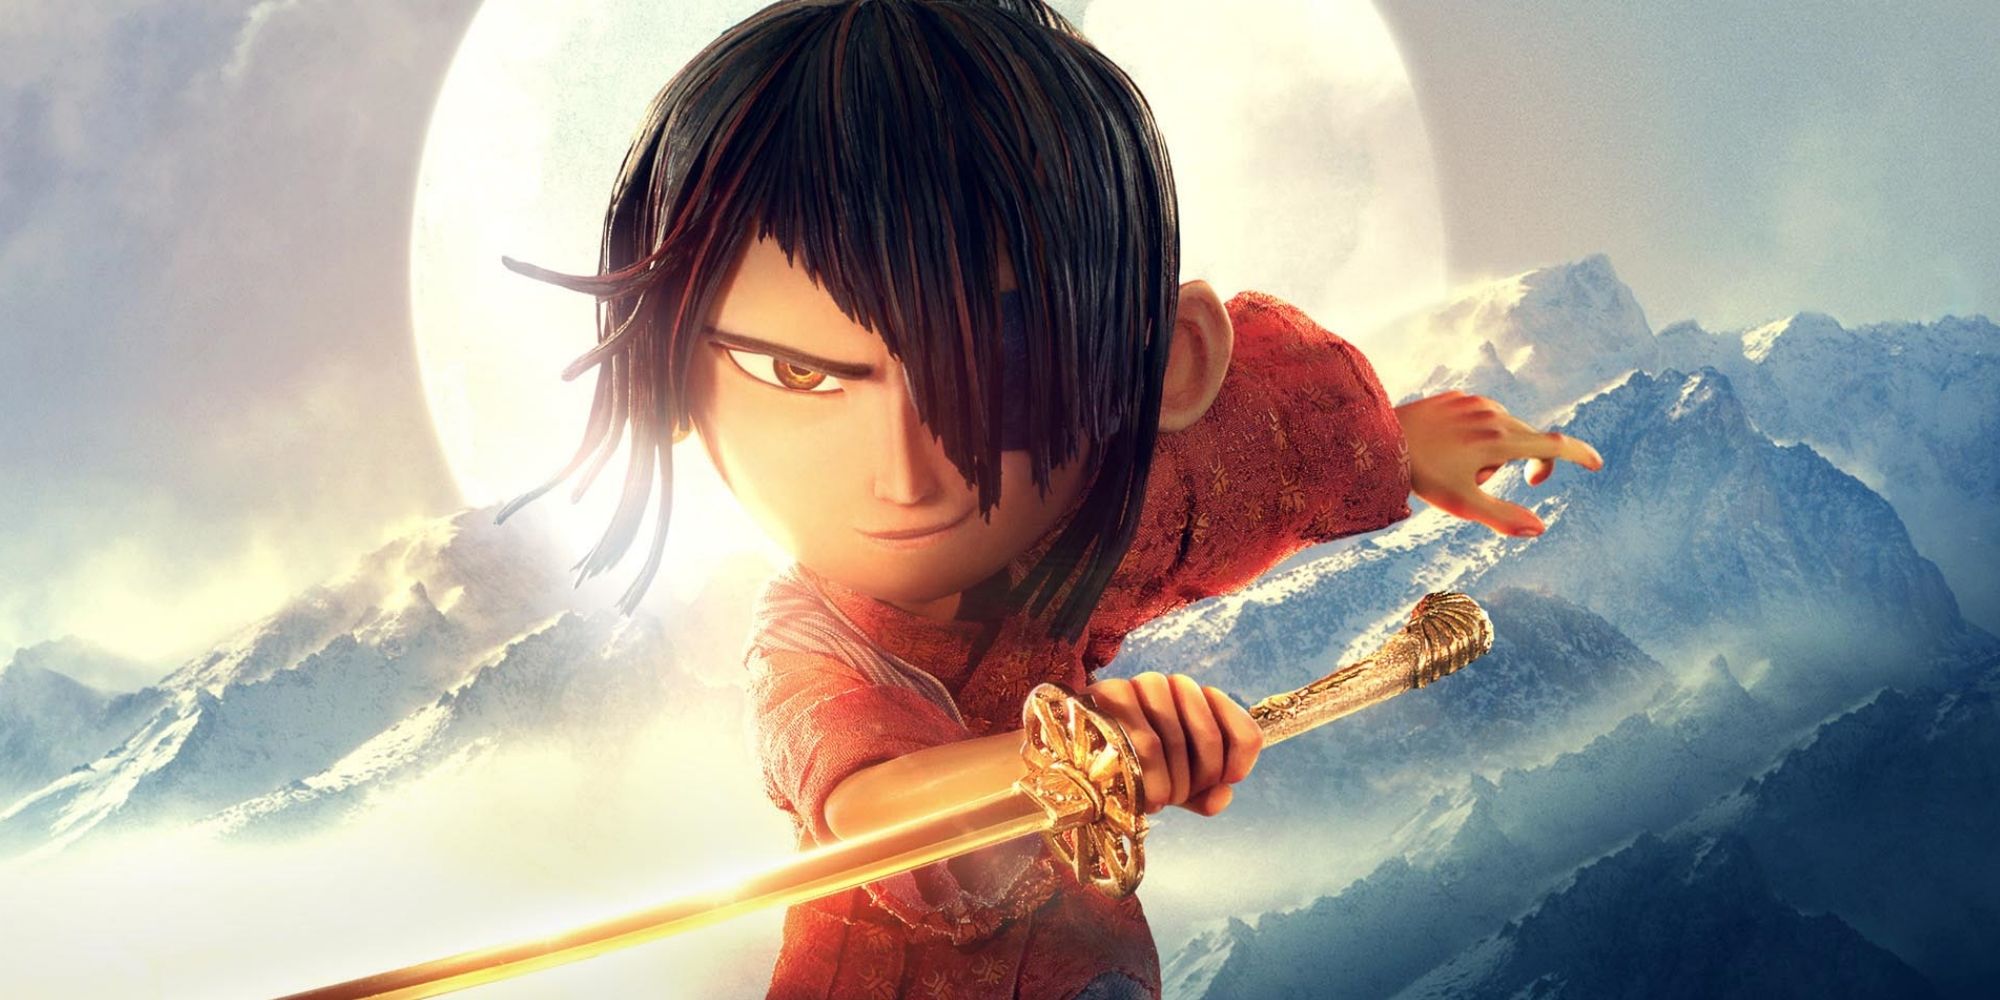 'Kubo and the Two Strings' promotional image showing Kubo holding a sword 